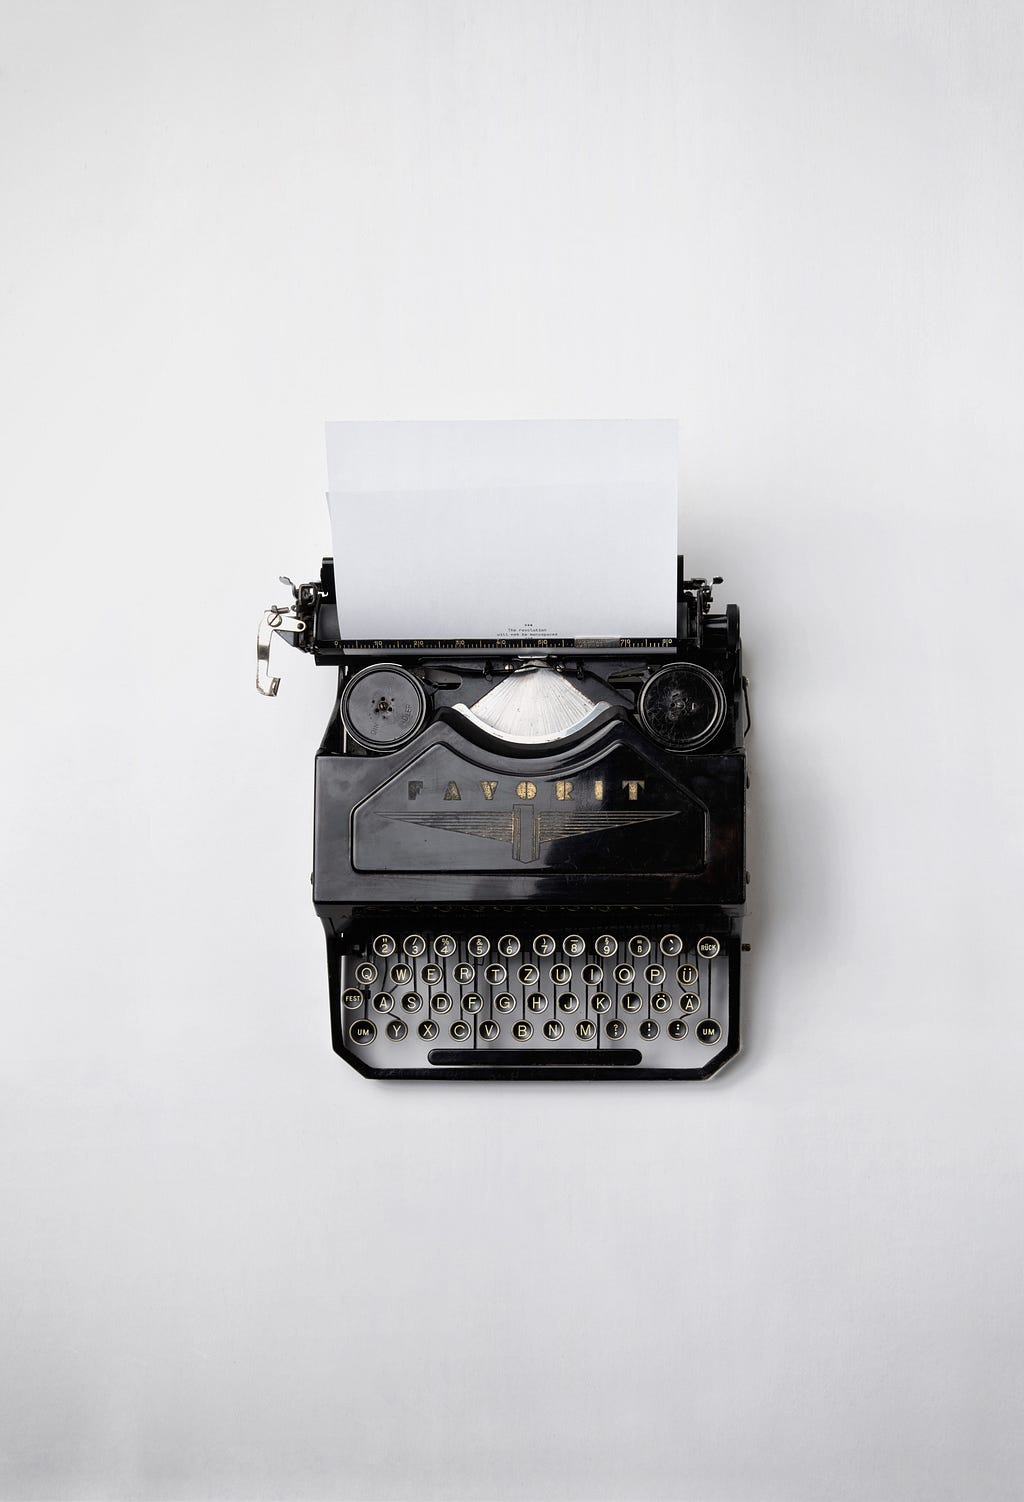 An antigue typewriter with a blank sheet of paper